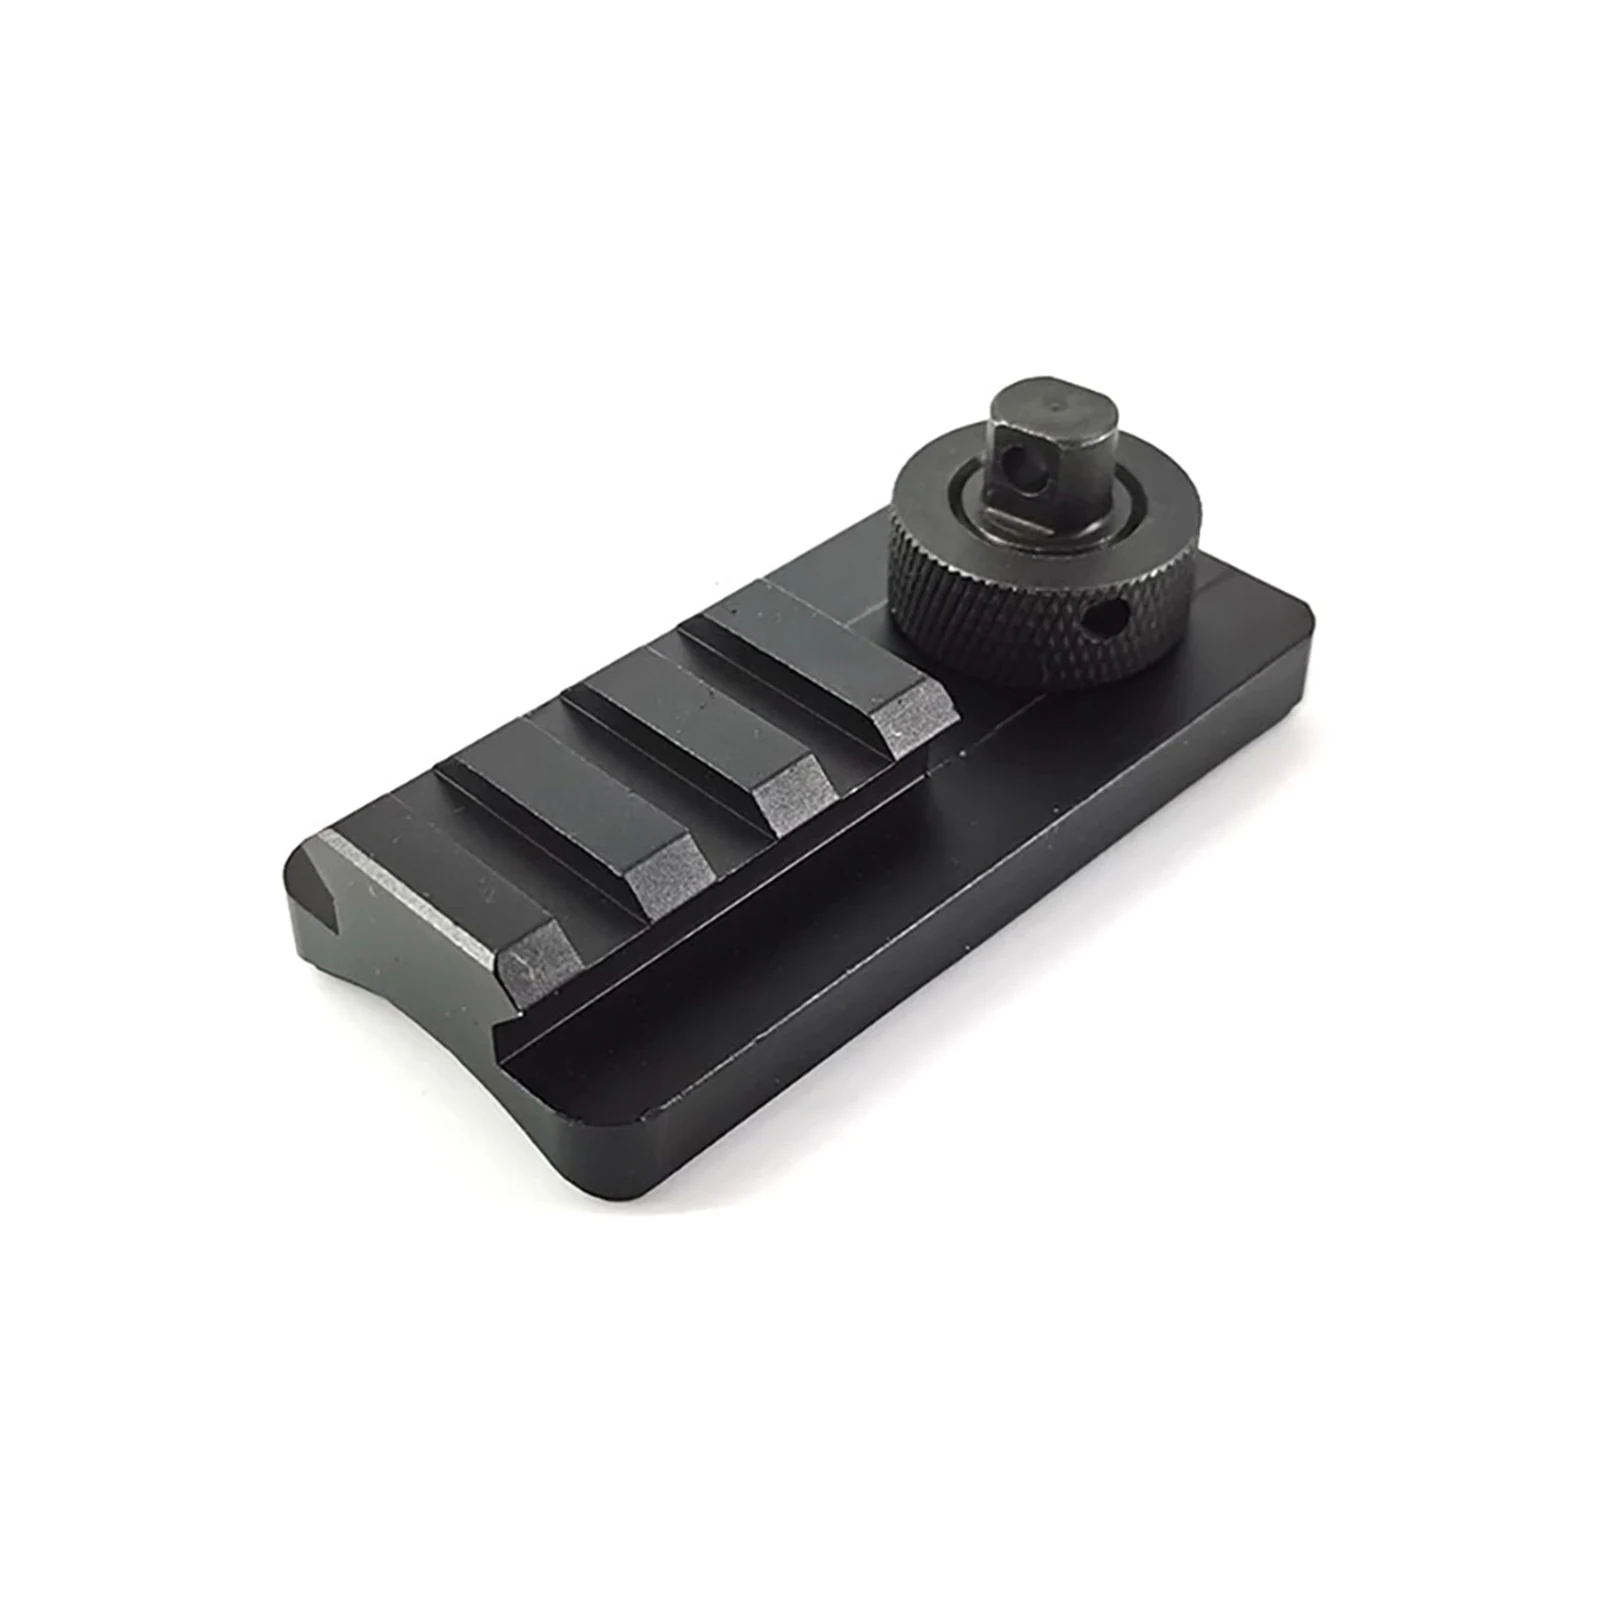 

Tactical 3 Slots 20mm Picatinny Weaver Rail Mount Adapter with Sling Swivel Stud for Hunting Airsfot V8 Bipod Rifle Accessory